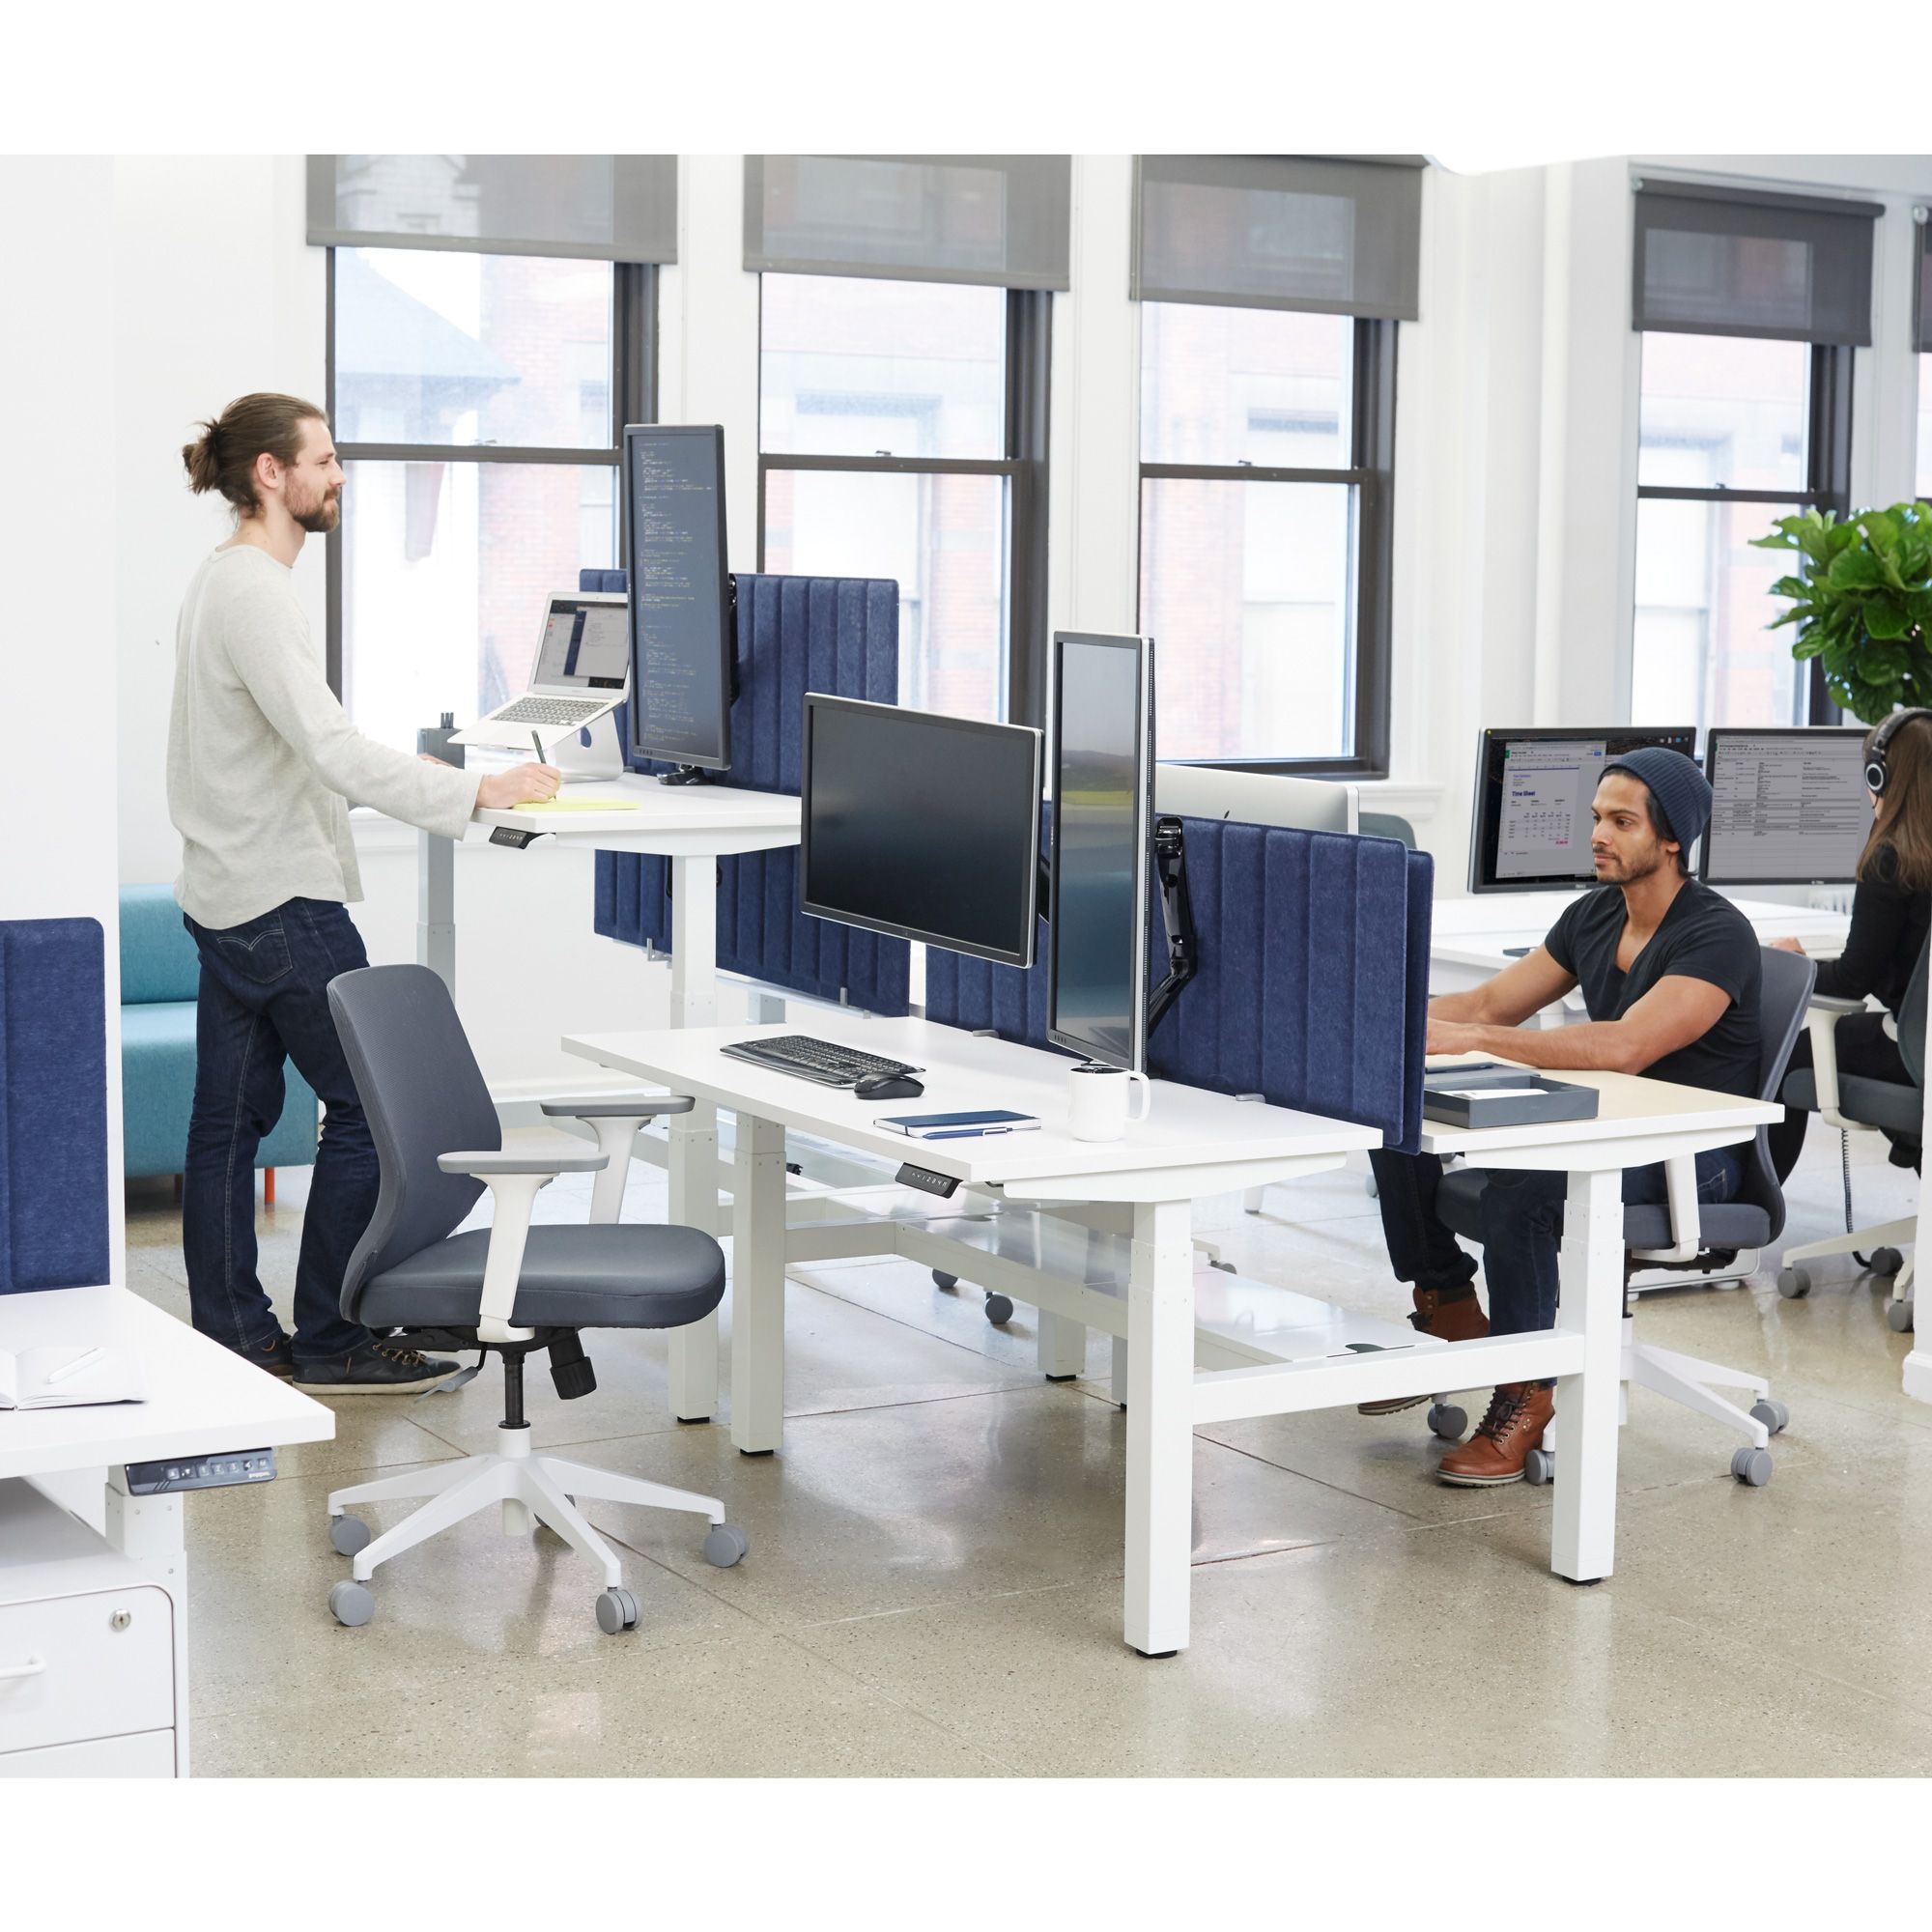 Series L Adjustable Height Double Desk for 2, Charcoal Legs | Adjustable Height Desks | Poppin